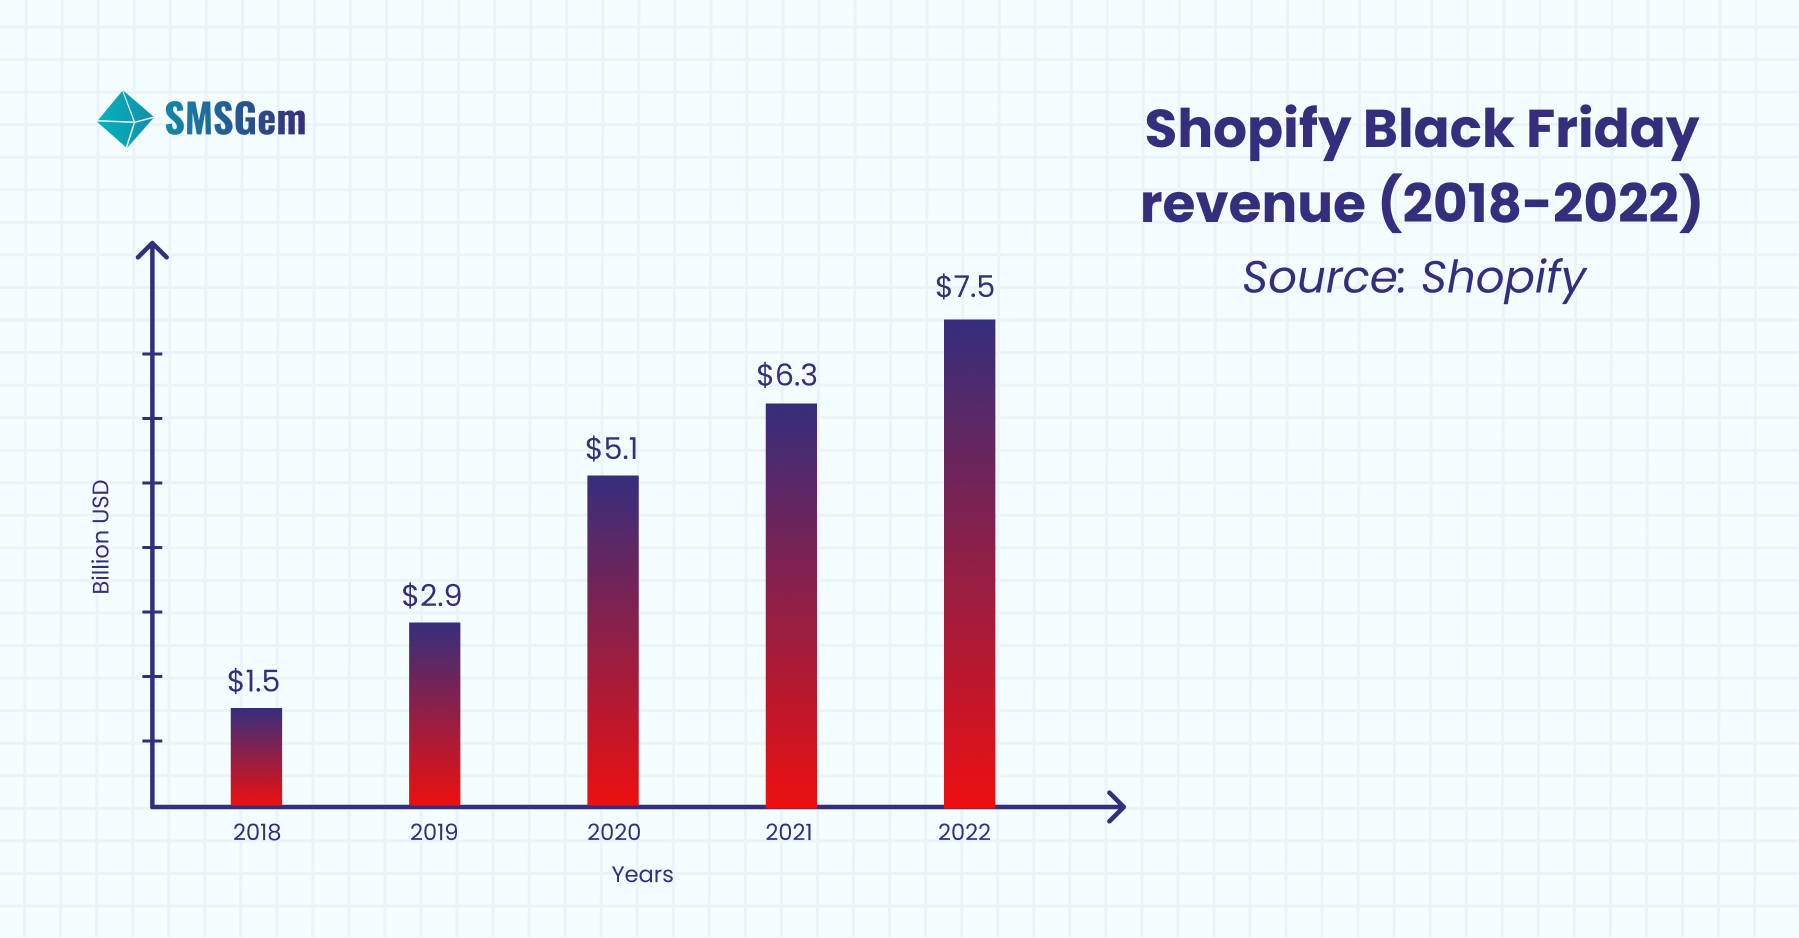 Shopify Black Friday revenue from 2018 to 2022